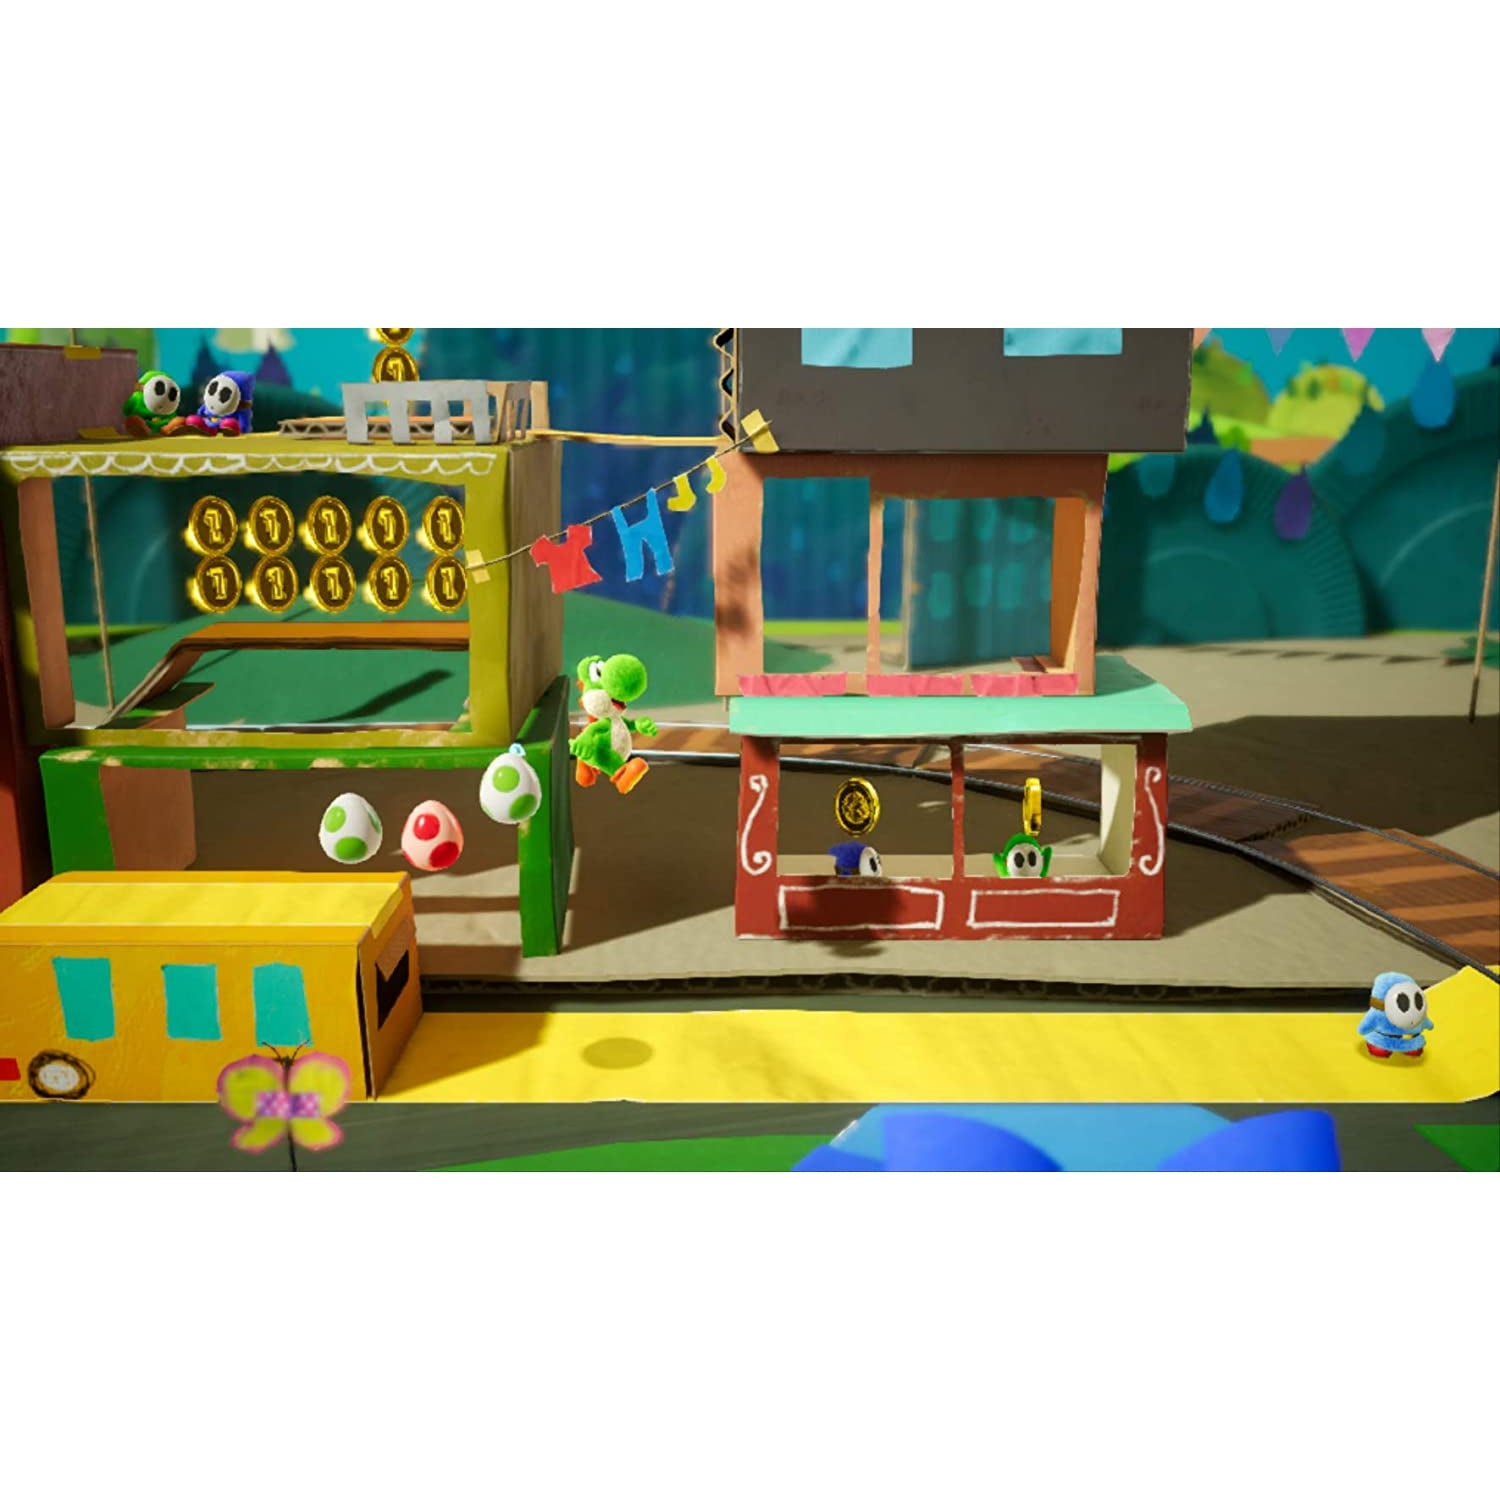 Yoshi's Crafted World (Nintendo Switch) Video Game